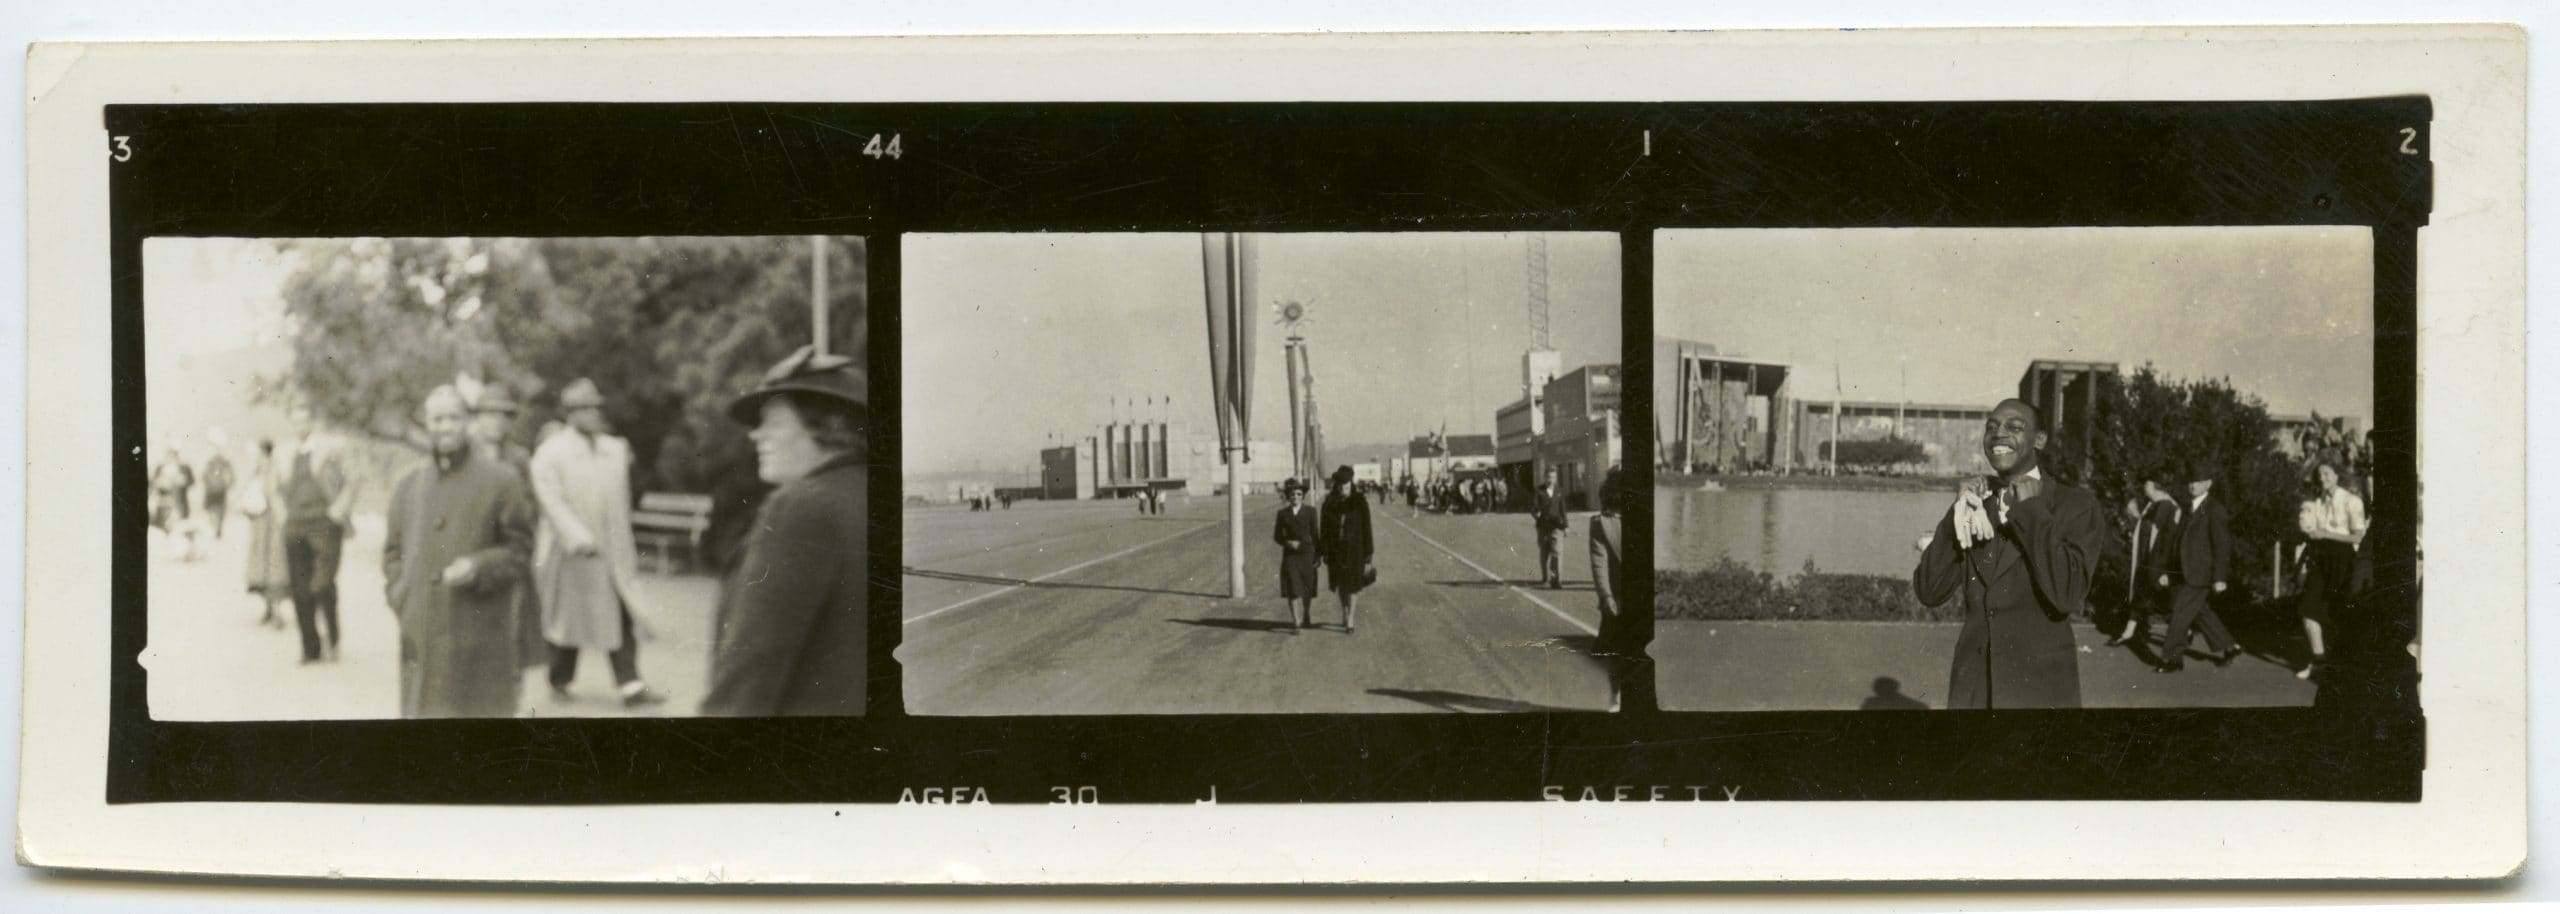 Historic image of Frenchie Linsey, Mary and Marie, and Joe Jones attending the Golden Gate International Exposition,